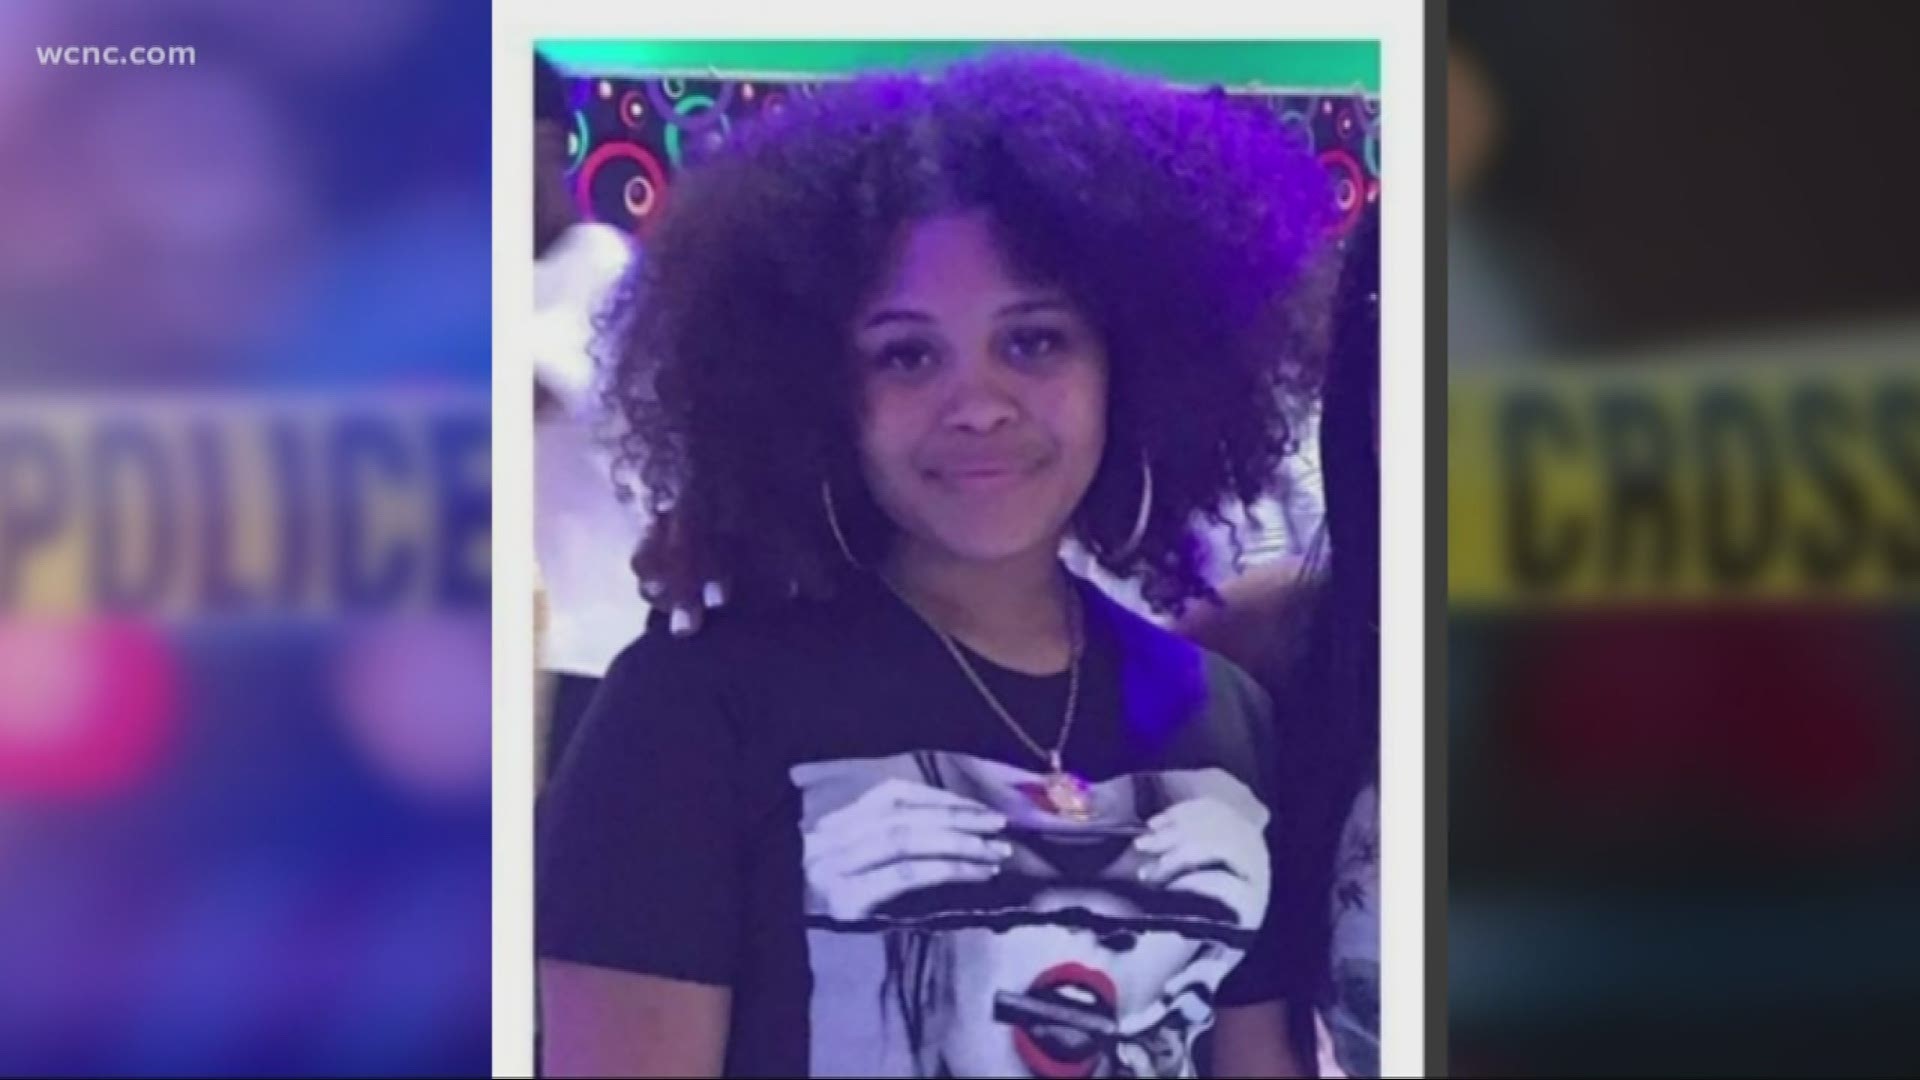 Police in Fayetteville, North Carolina are asking for the public's help finding a 15-year-old who was last seen in September.